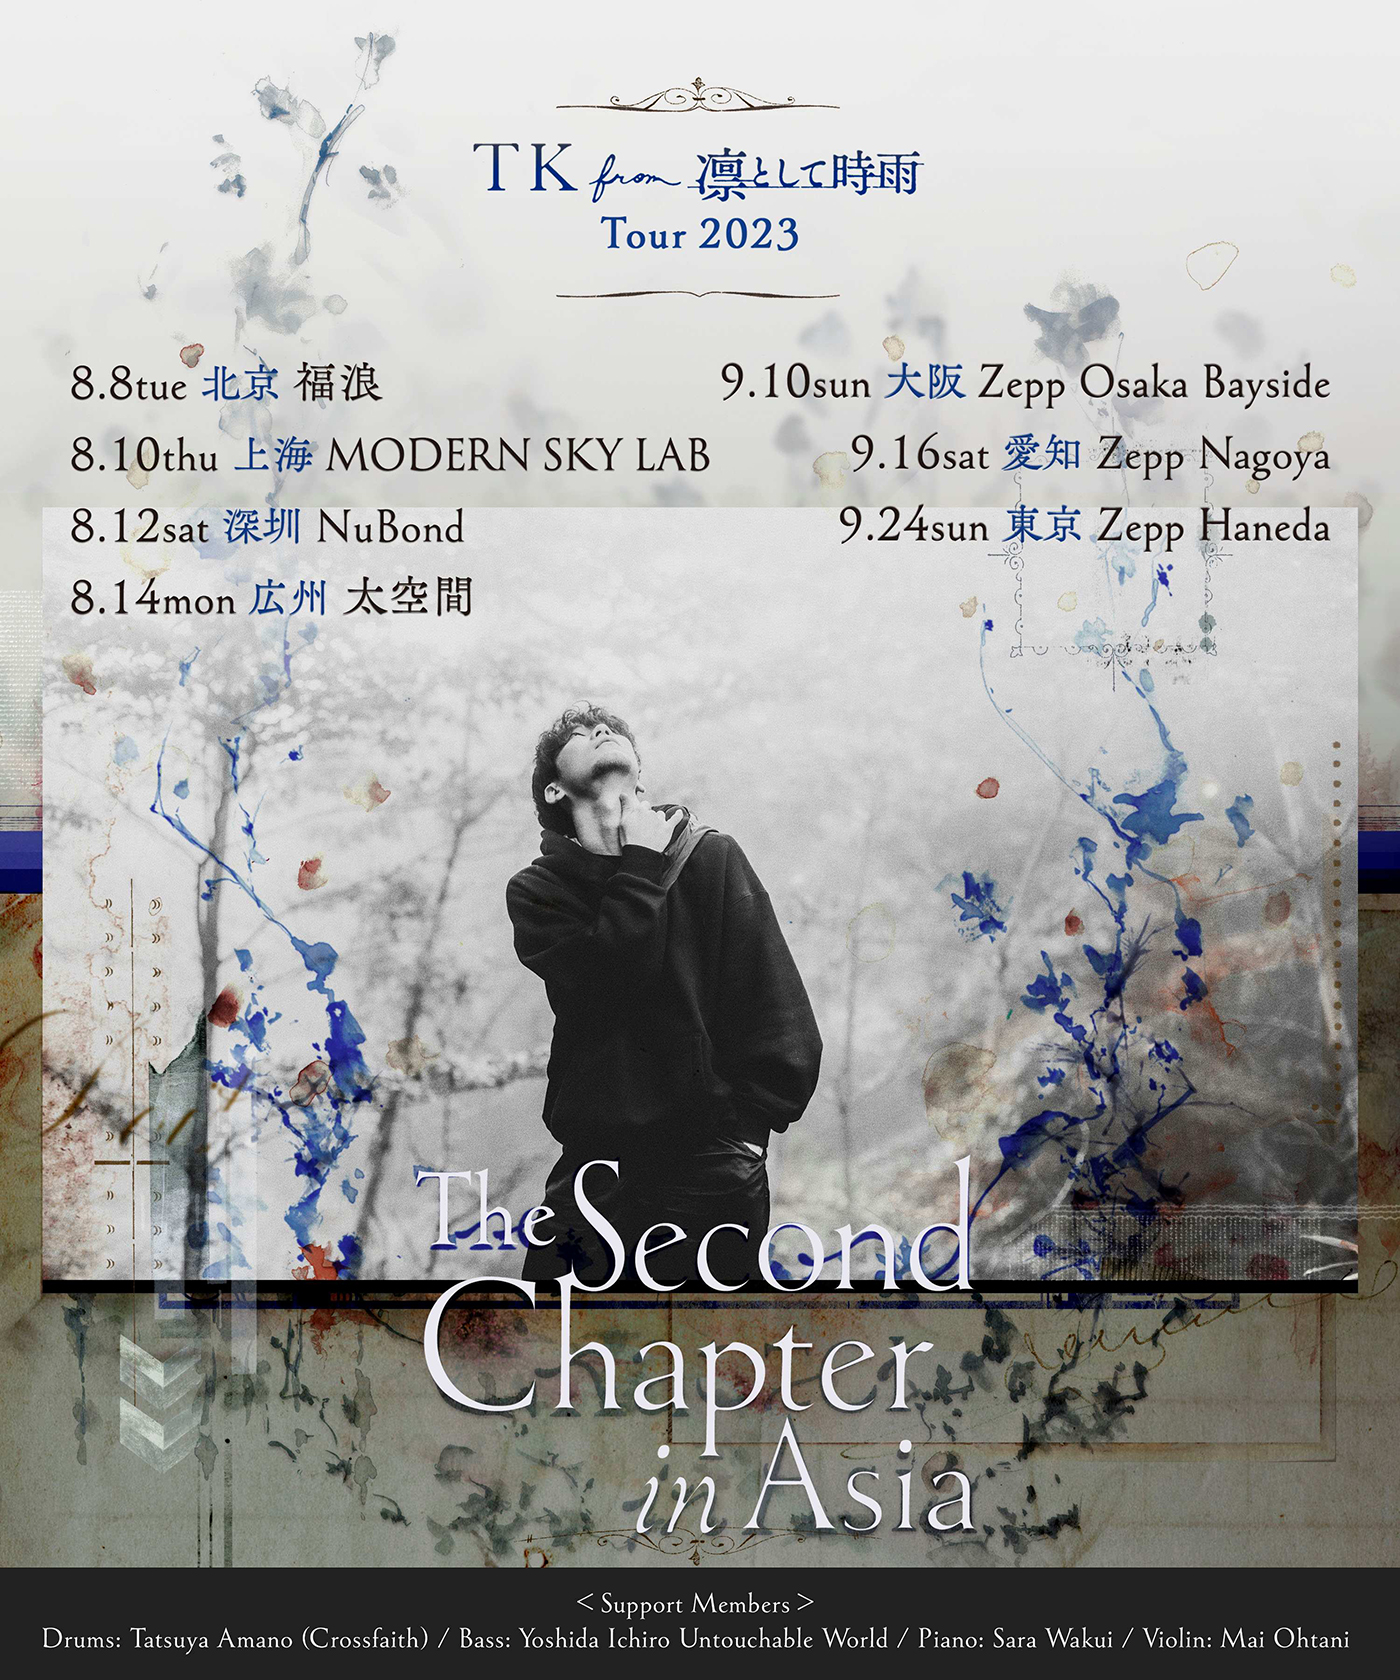 TK from 凛として時雨、ライブツアー『The Second Chapter』が日本と中国で開催決定